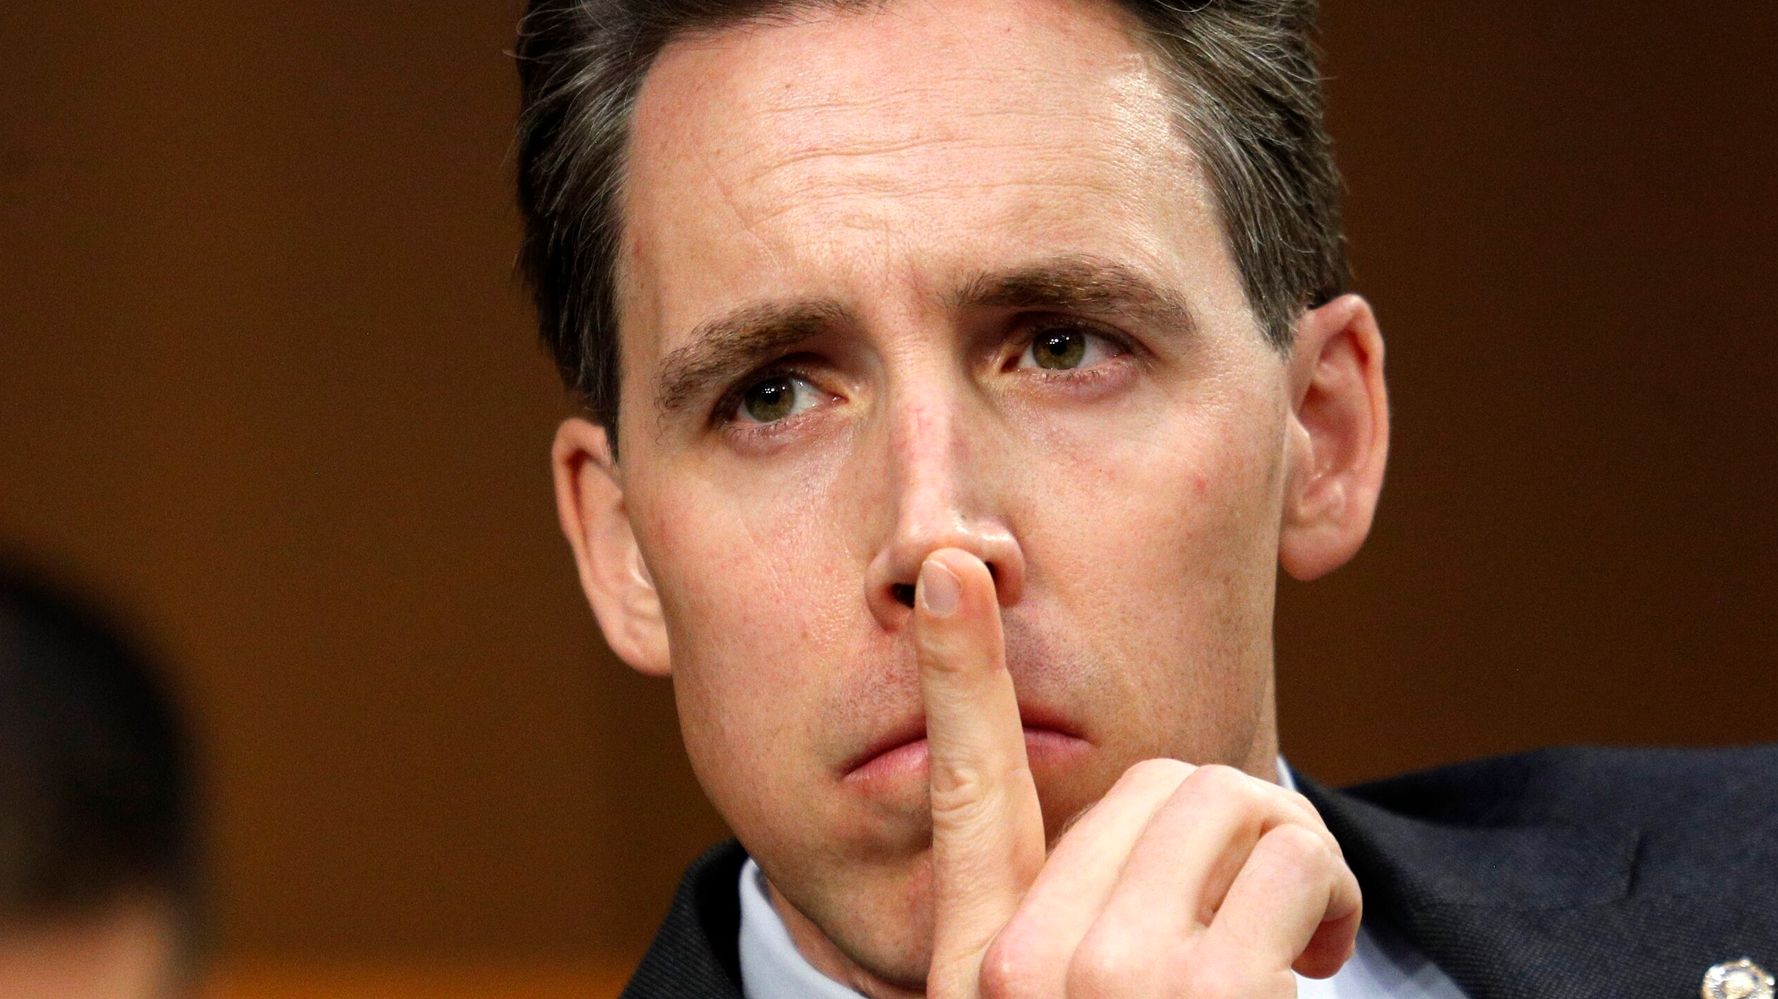 MSNBC Goes To Town On GOP Sen. Josh Hawley With A Stinging Supercut